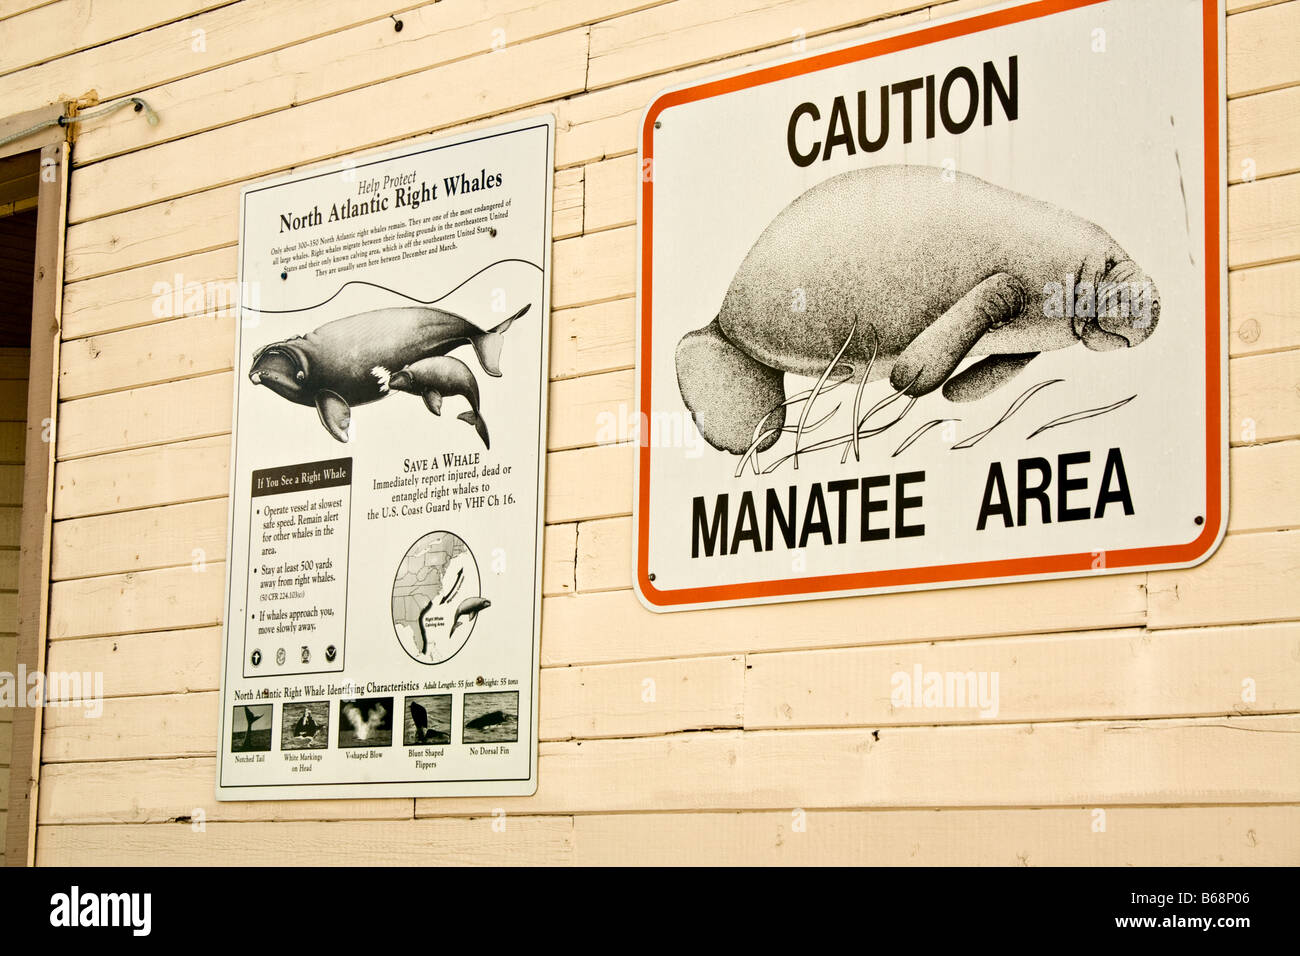 North Atlantic Right Whale and Manatee area warning sign on the side of a building Stock Photo